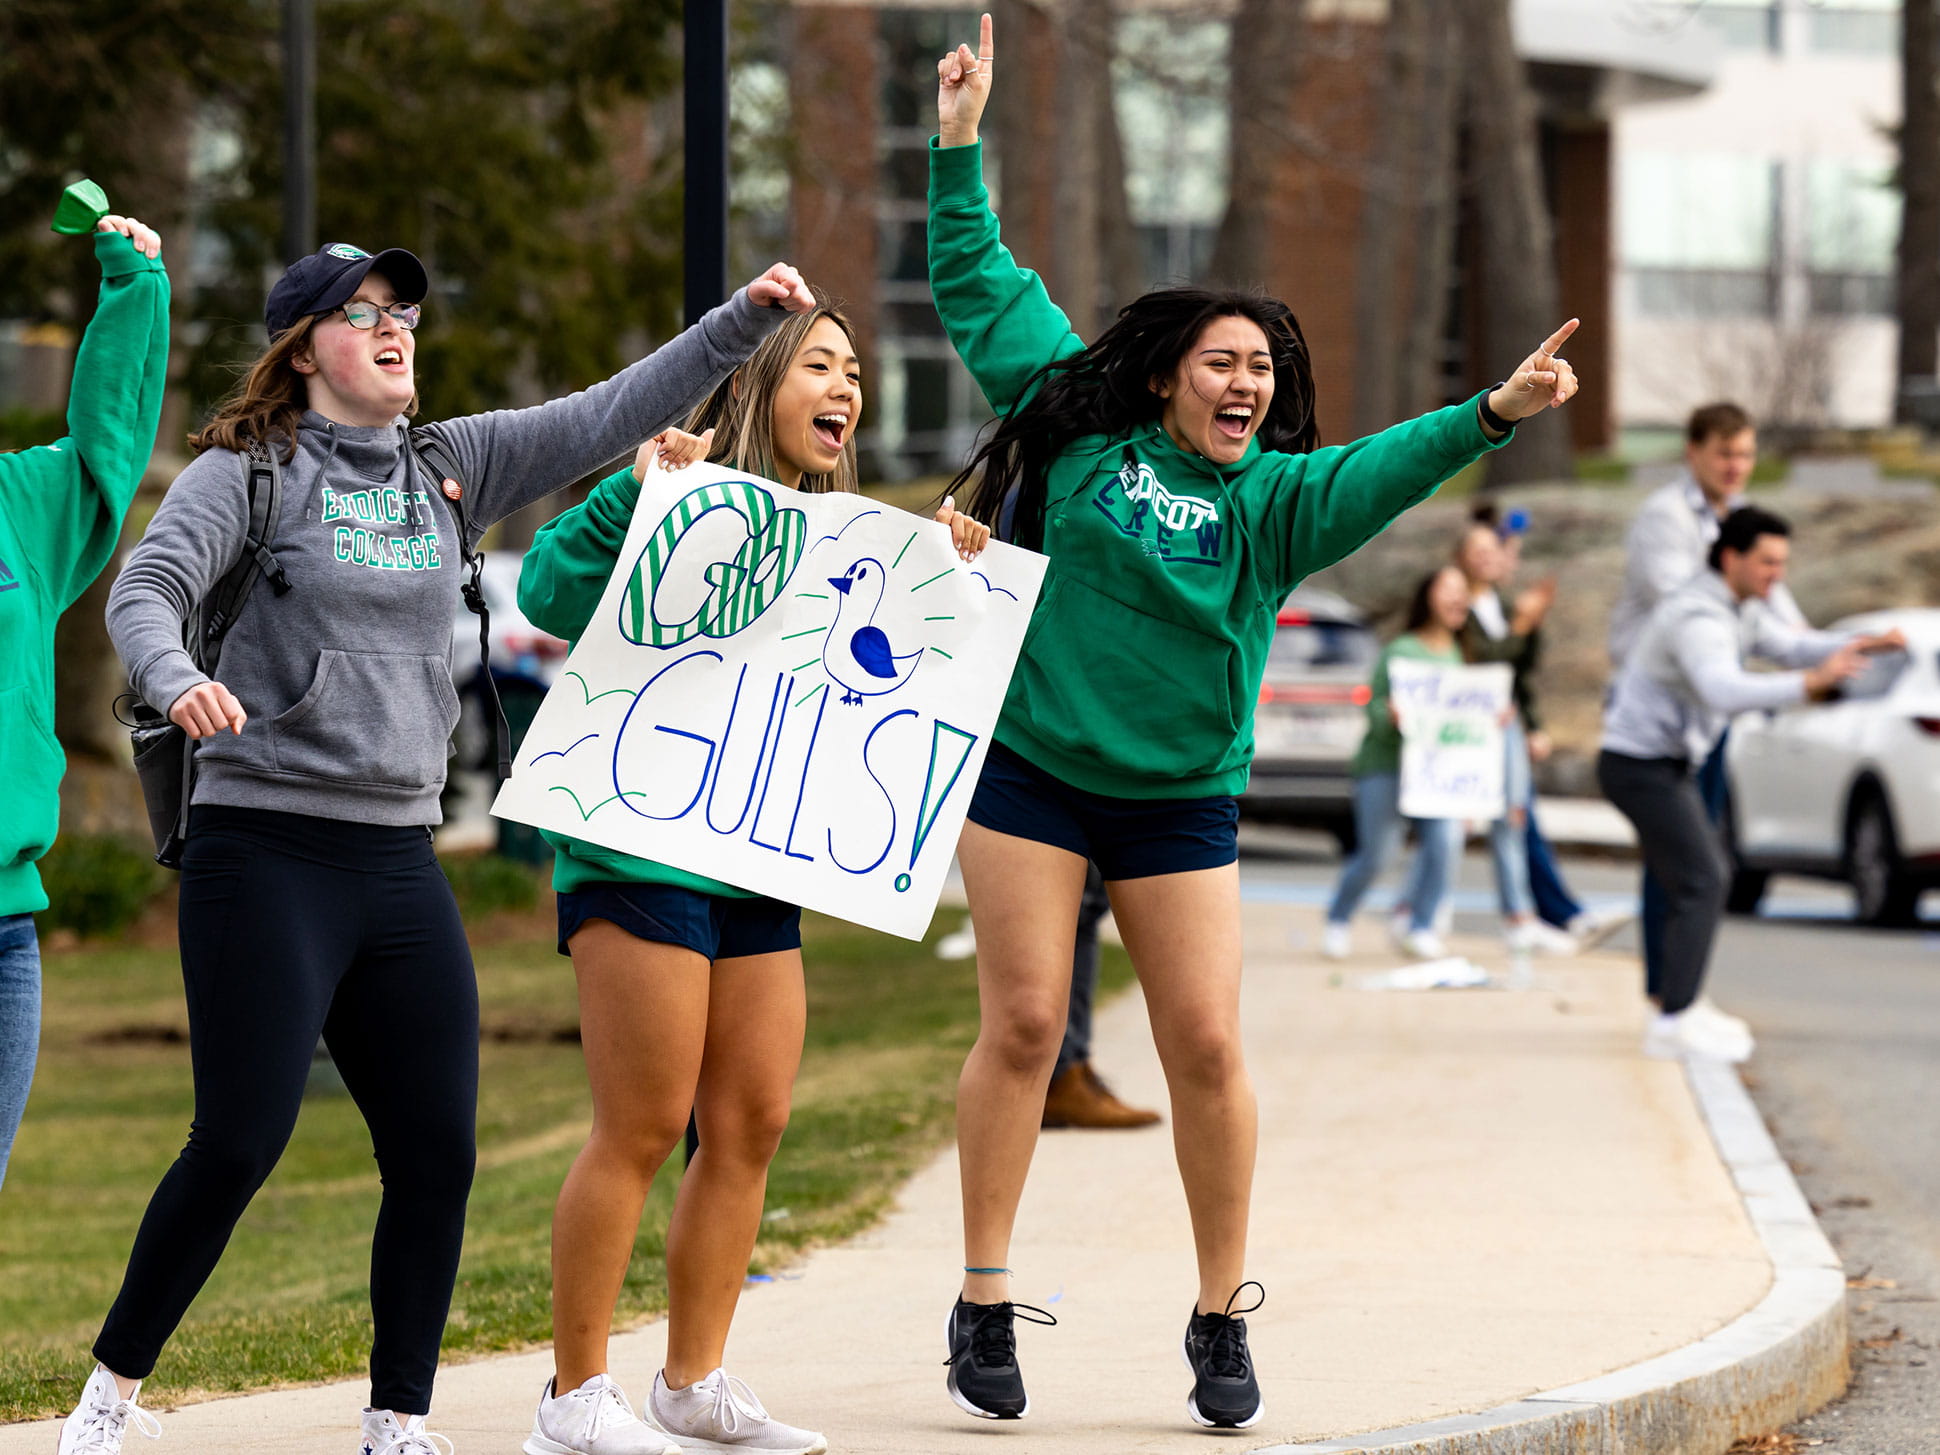 Endicott Accepted Students Day